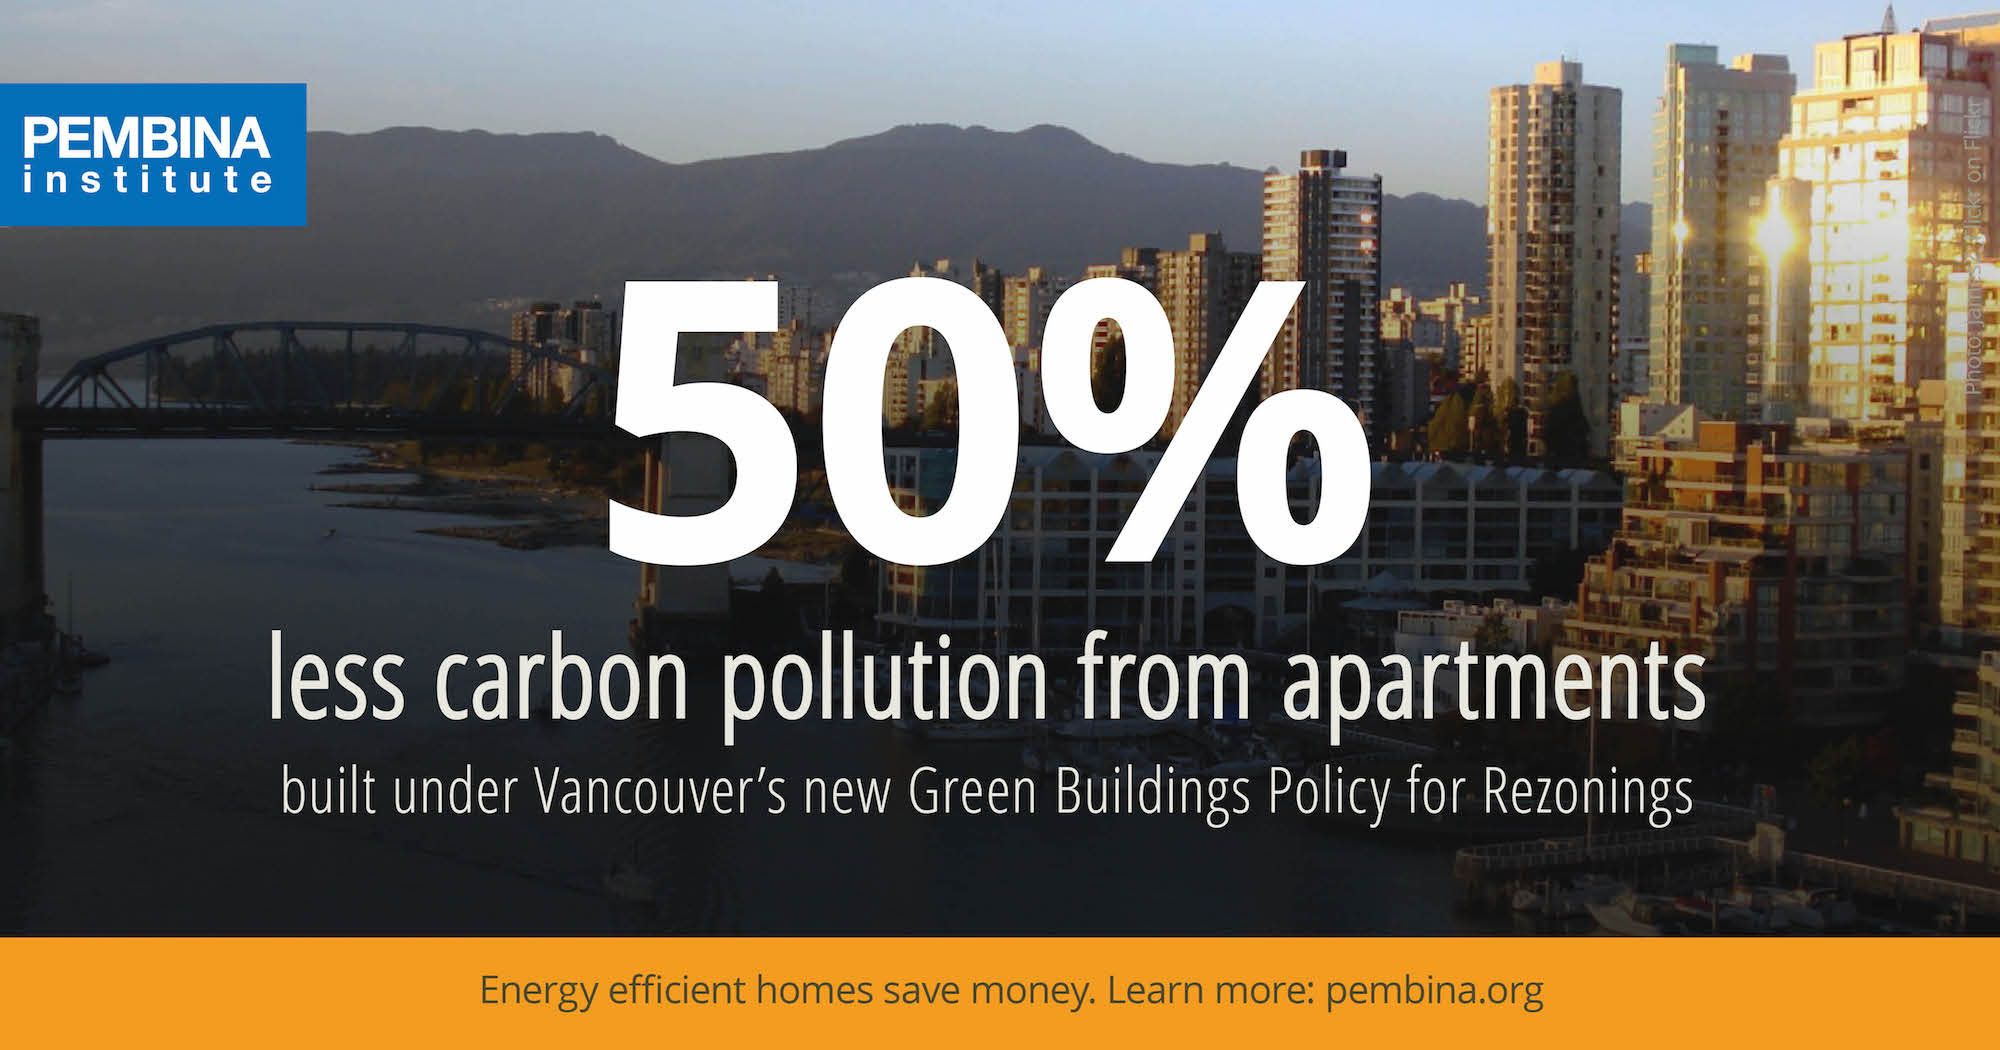 Vancouver Green Buildings Policy for Rezonings